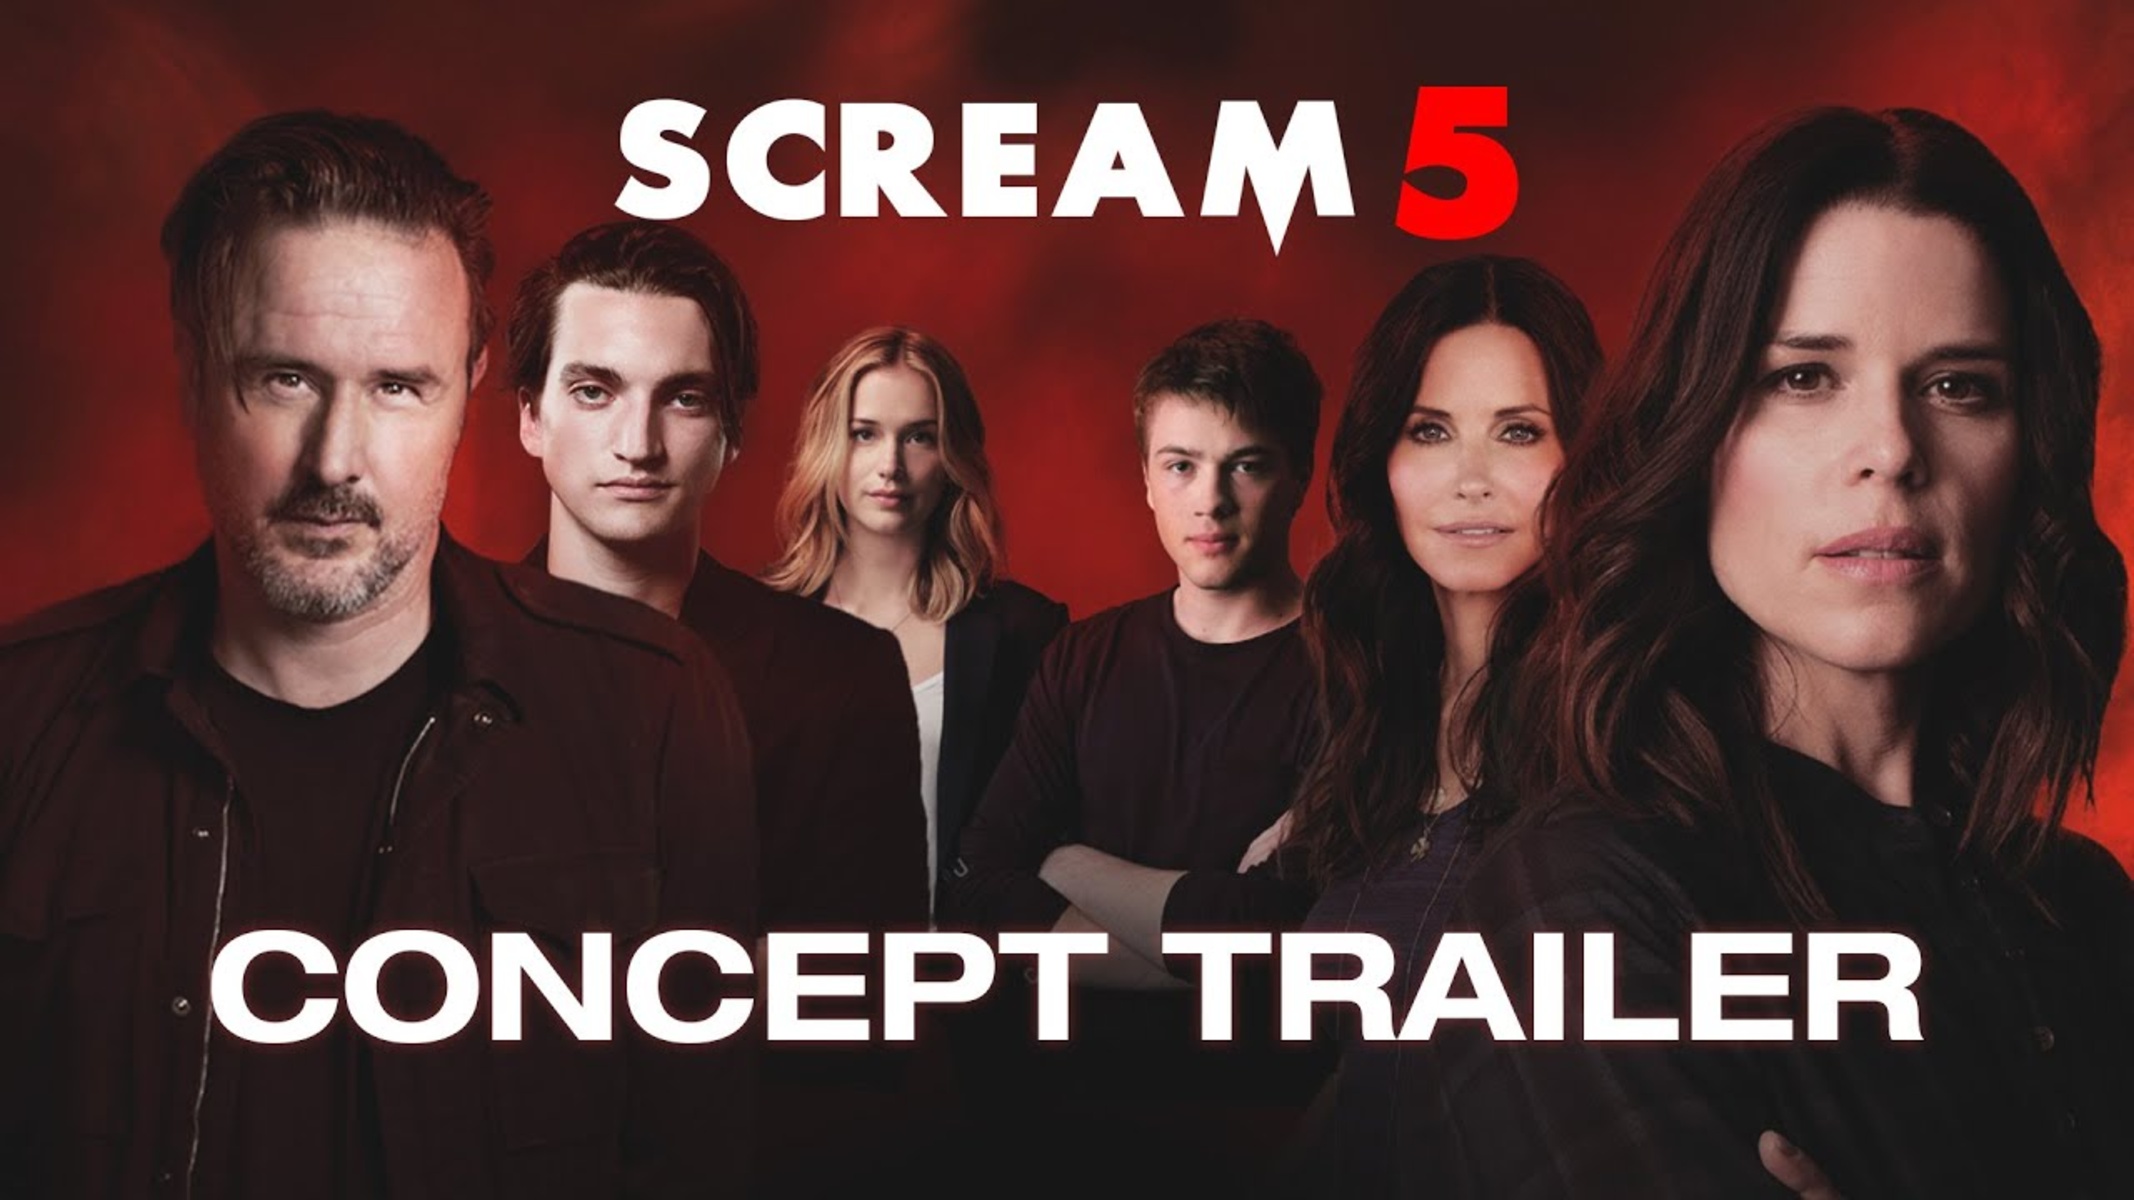 How To Watch Scream 5